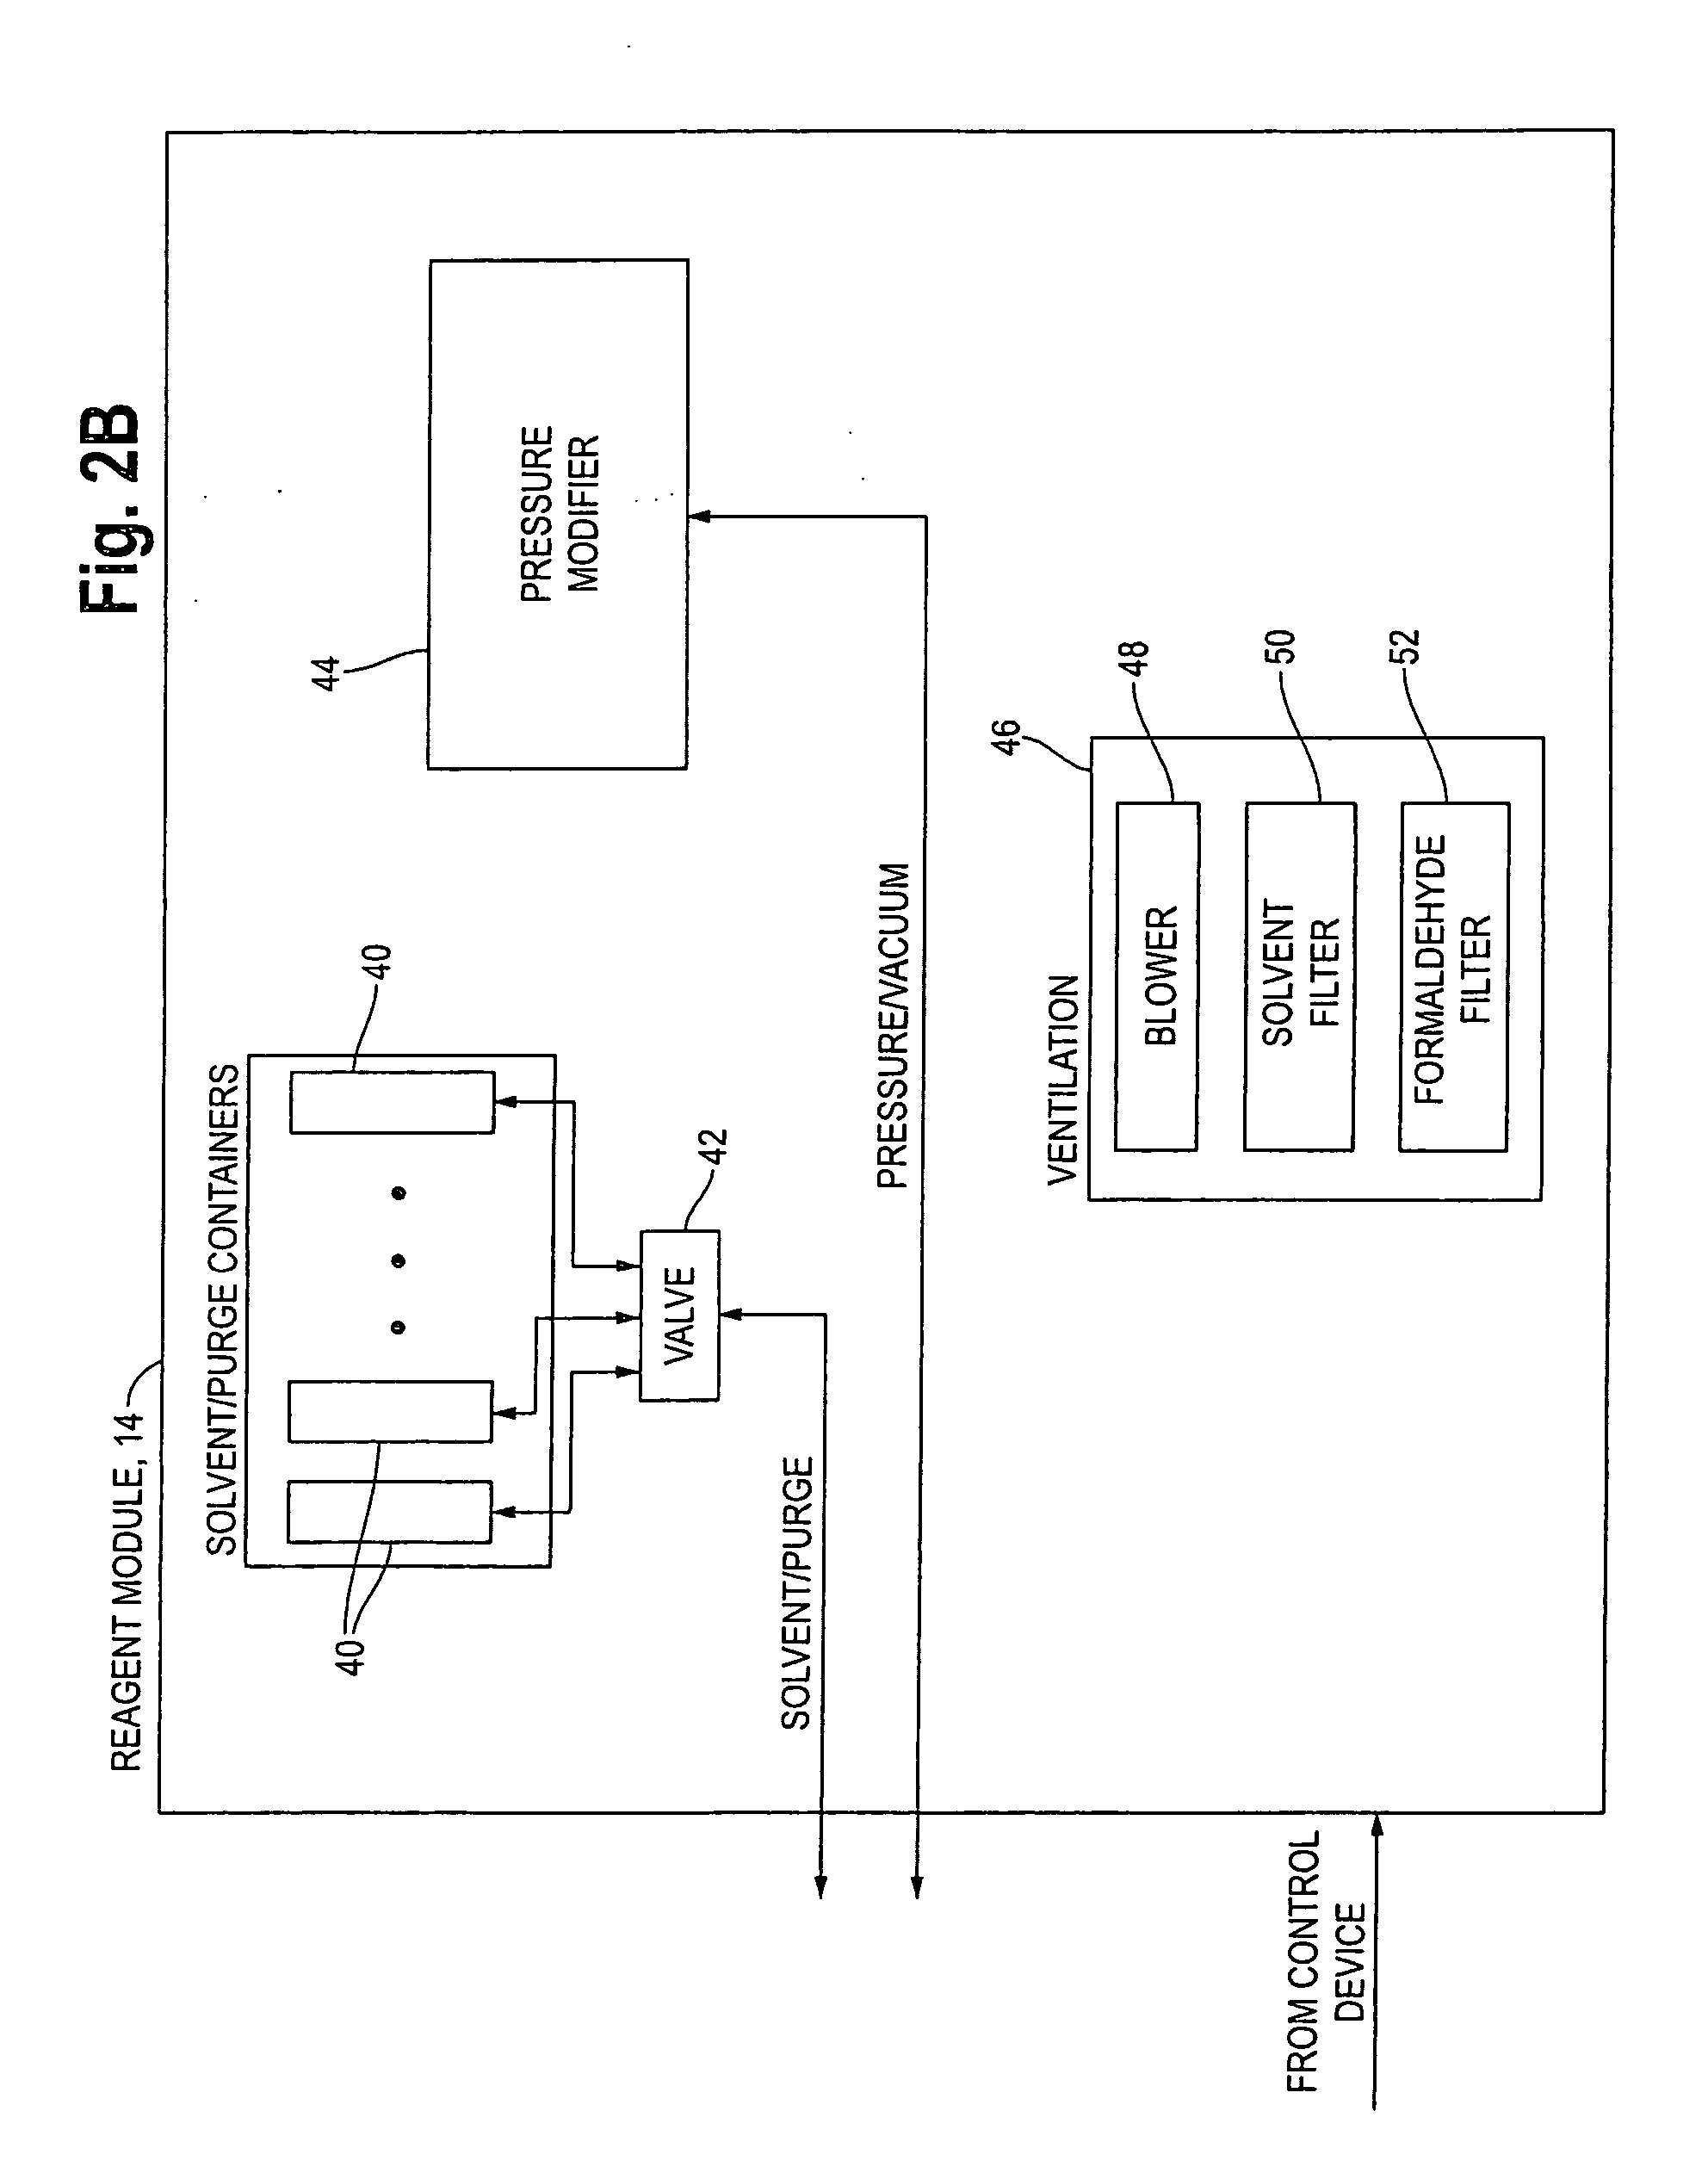 Method and apparatus for automated reprocessing of tissue samples